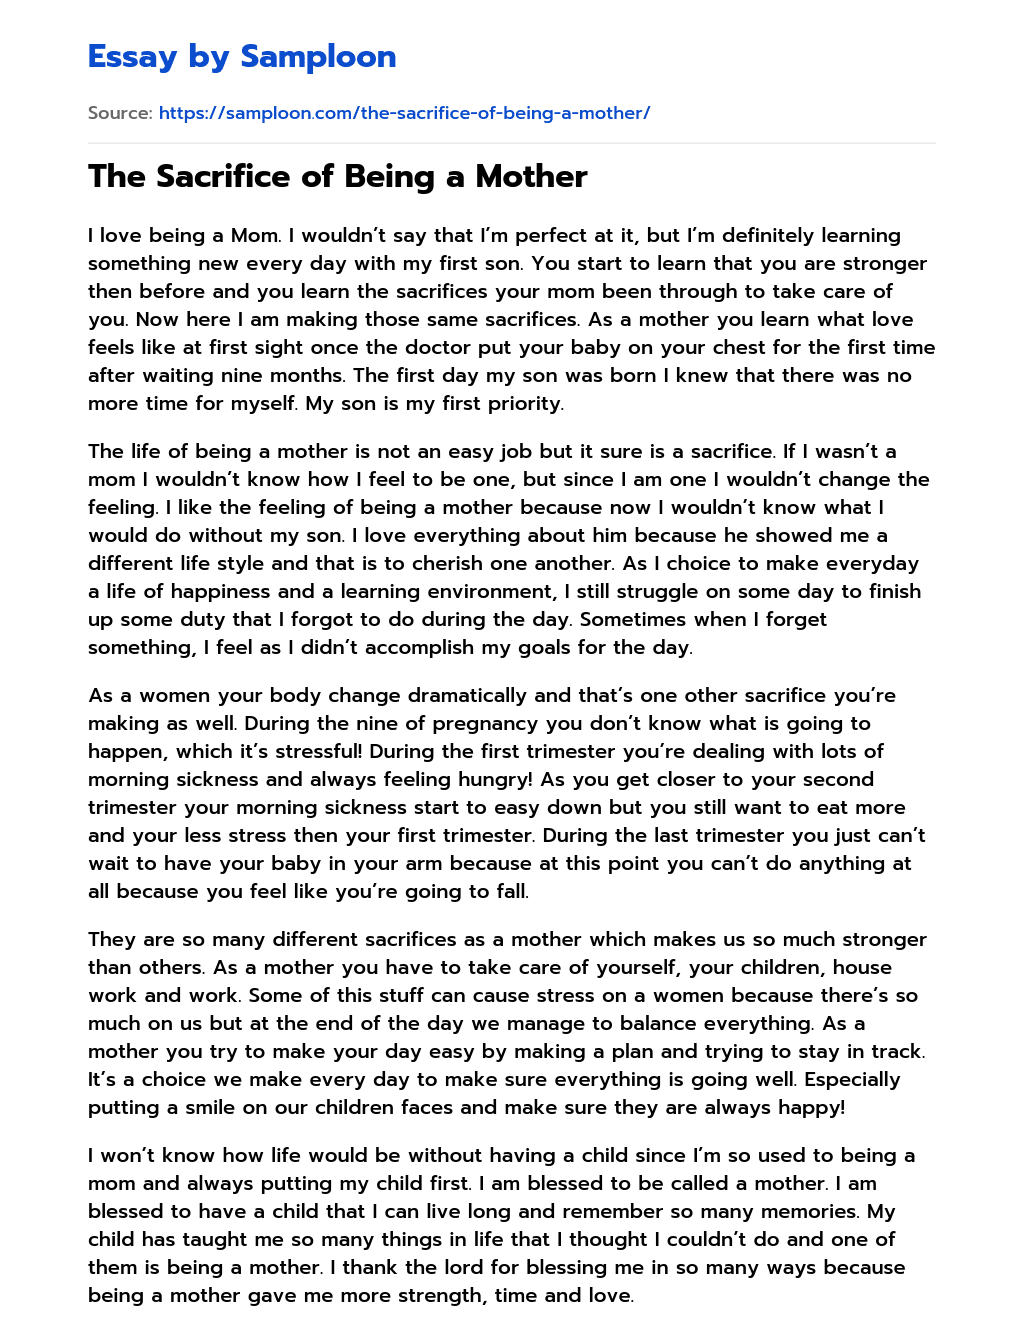 The Sacrifice of Being a Mother essay